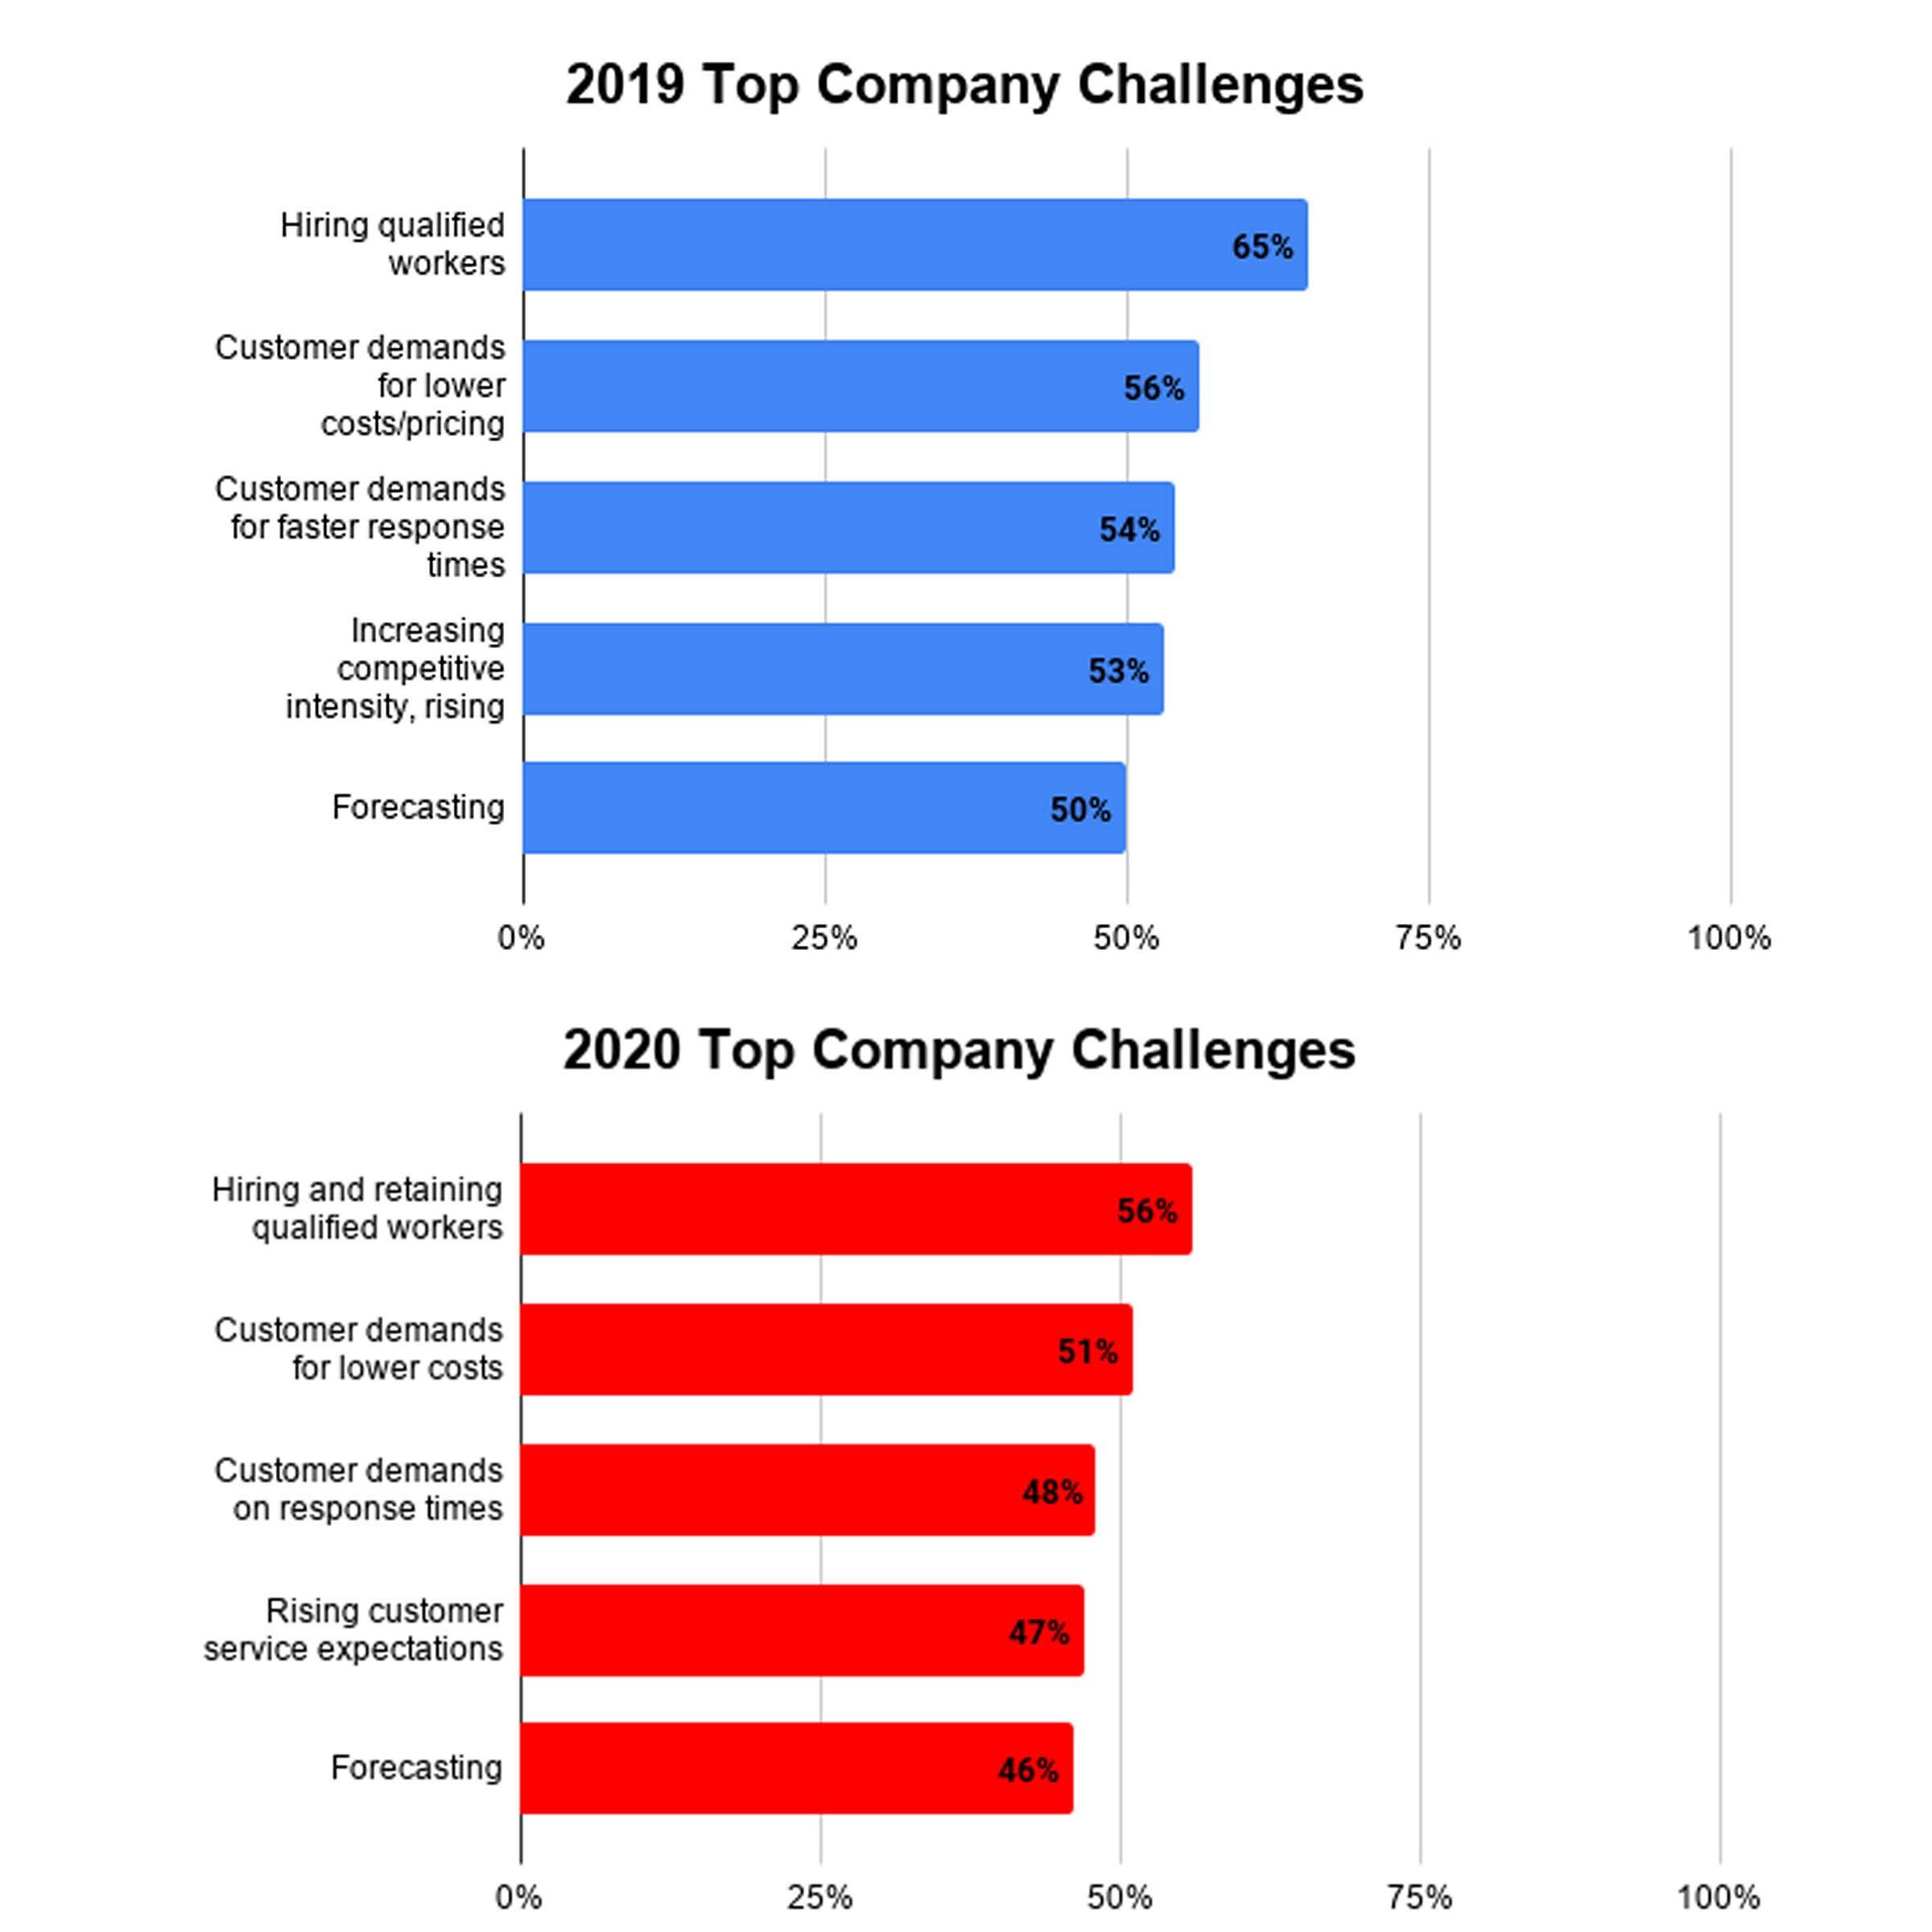 Chart 1: MHI’s top company challenges from 2019 to 2020. Hiring qualified workers remains the industry's top challenge. 